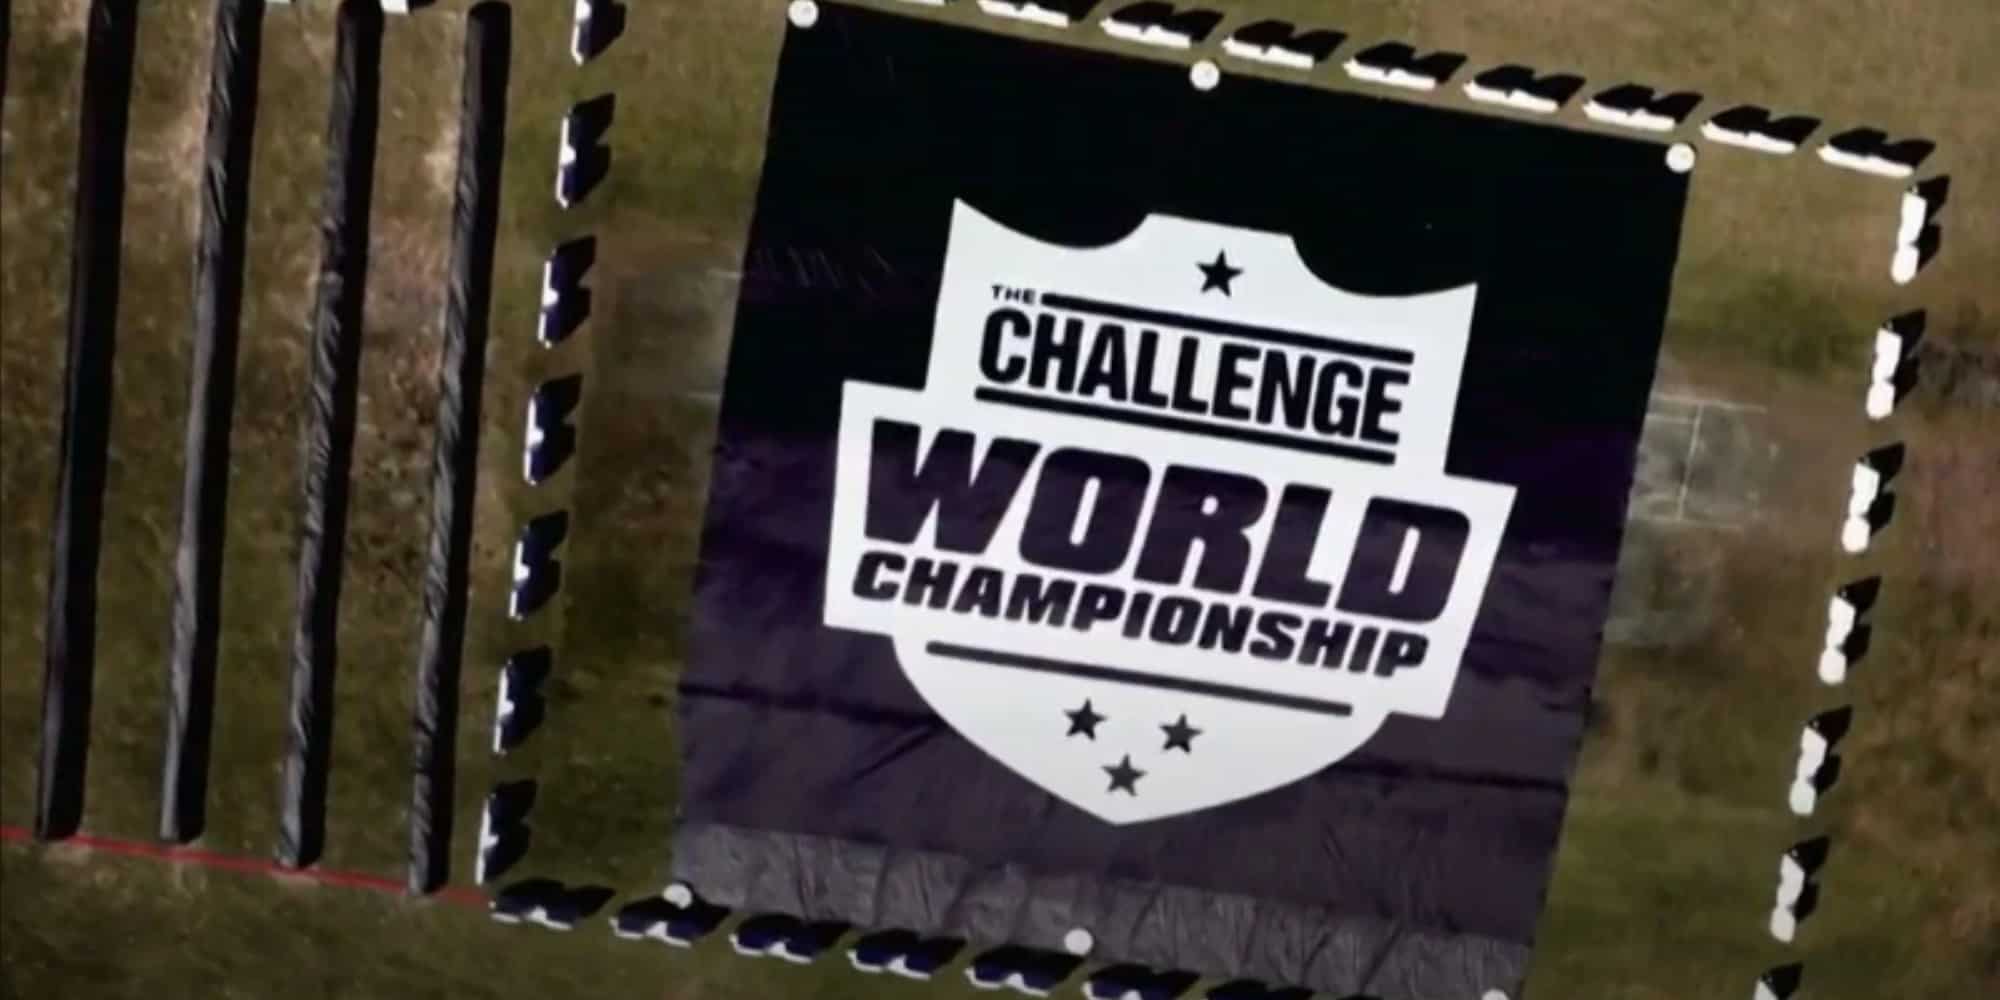 The Challenge World Championship Release Date